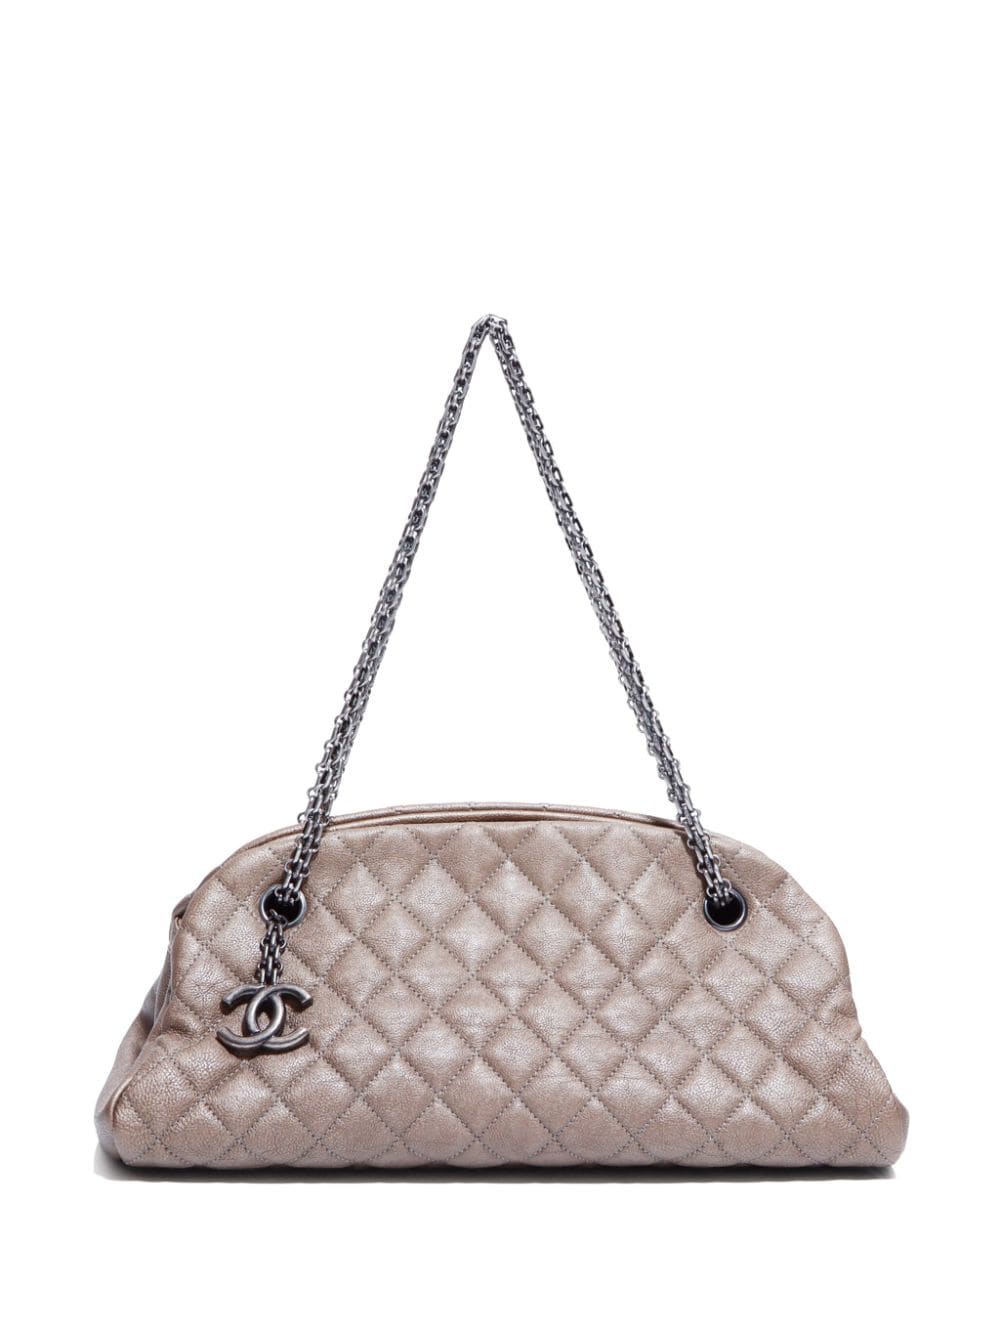 CHANEL Pre-Owned 2011 Mademoiselle shoulder bag - Neutrals von CHANEL Pre-Owned